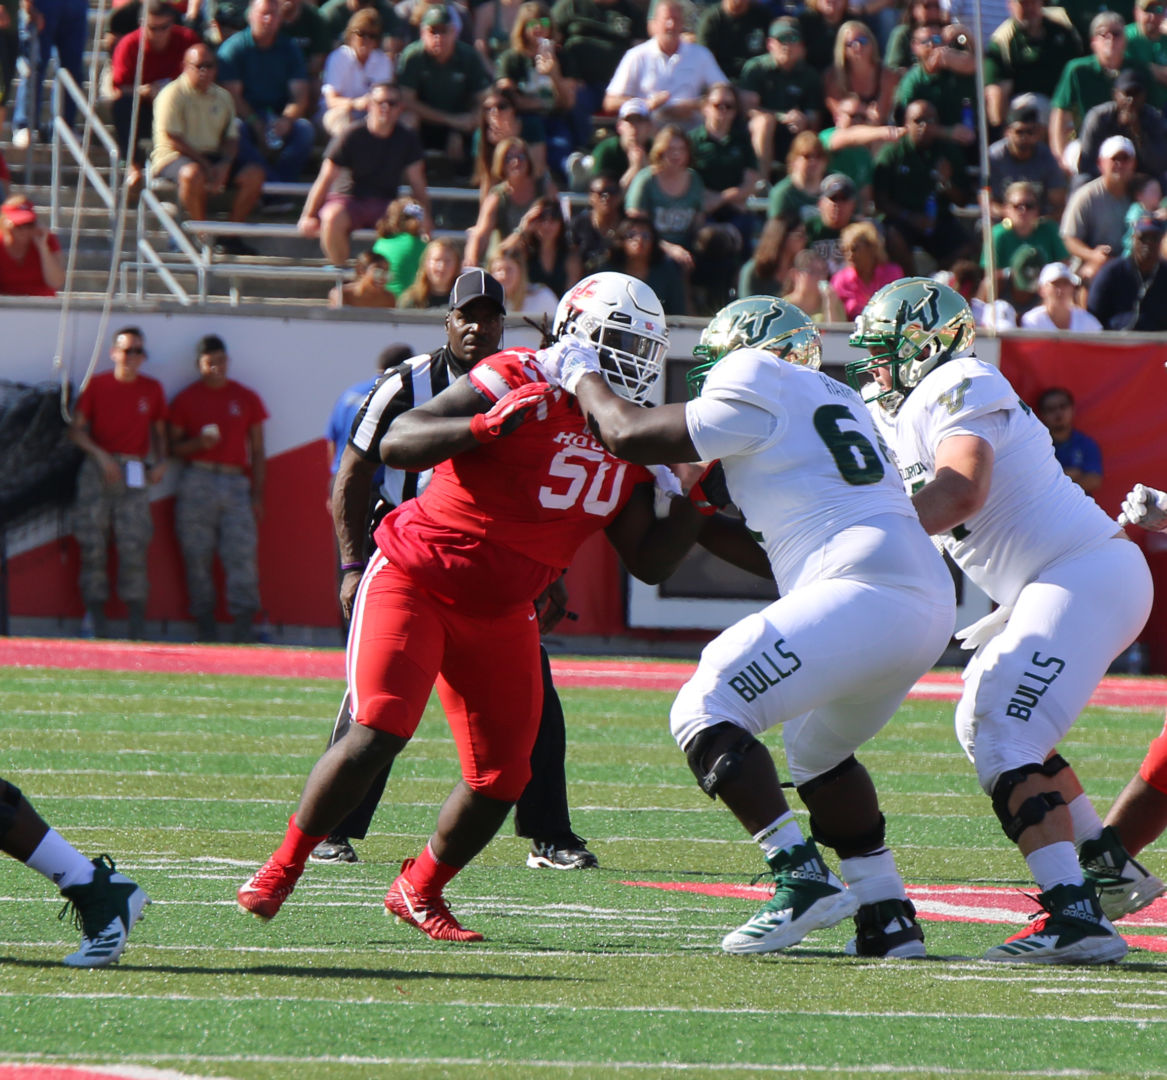 Senior defensive lineman Aymiel Fleming, shown in a 57-36 win over South Florida in 2018, said Houston's season-closer against No. 24 Navy 'my last college hoorah.' | File photo